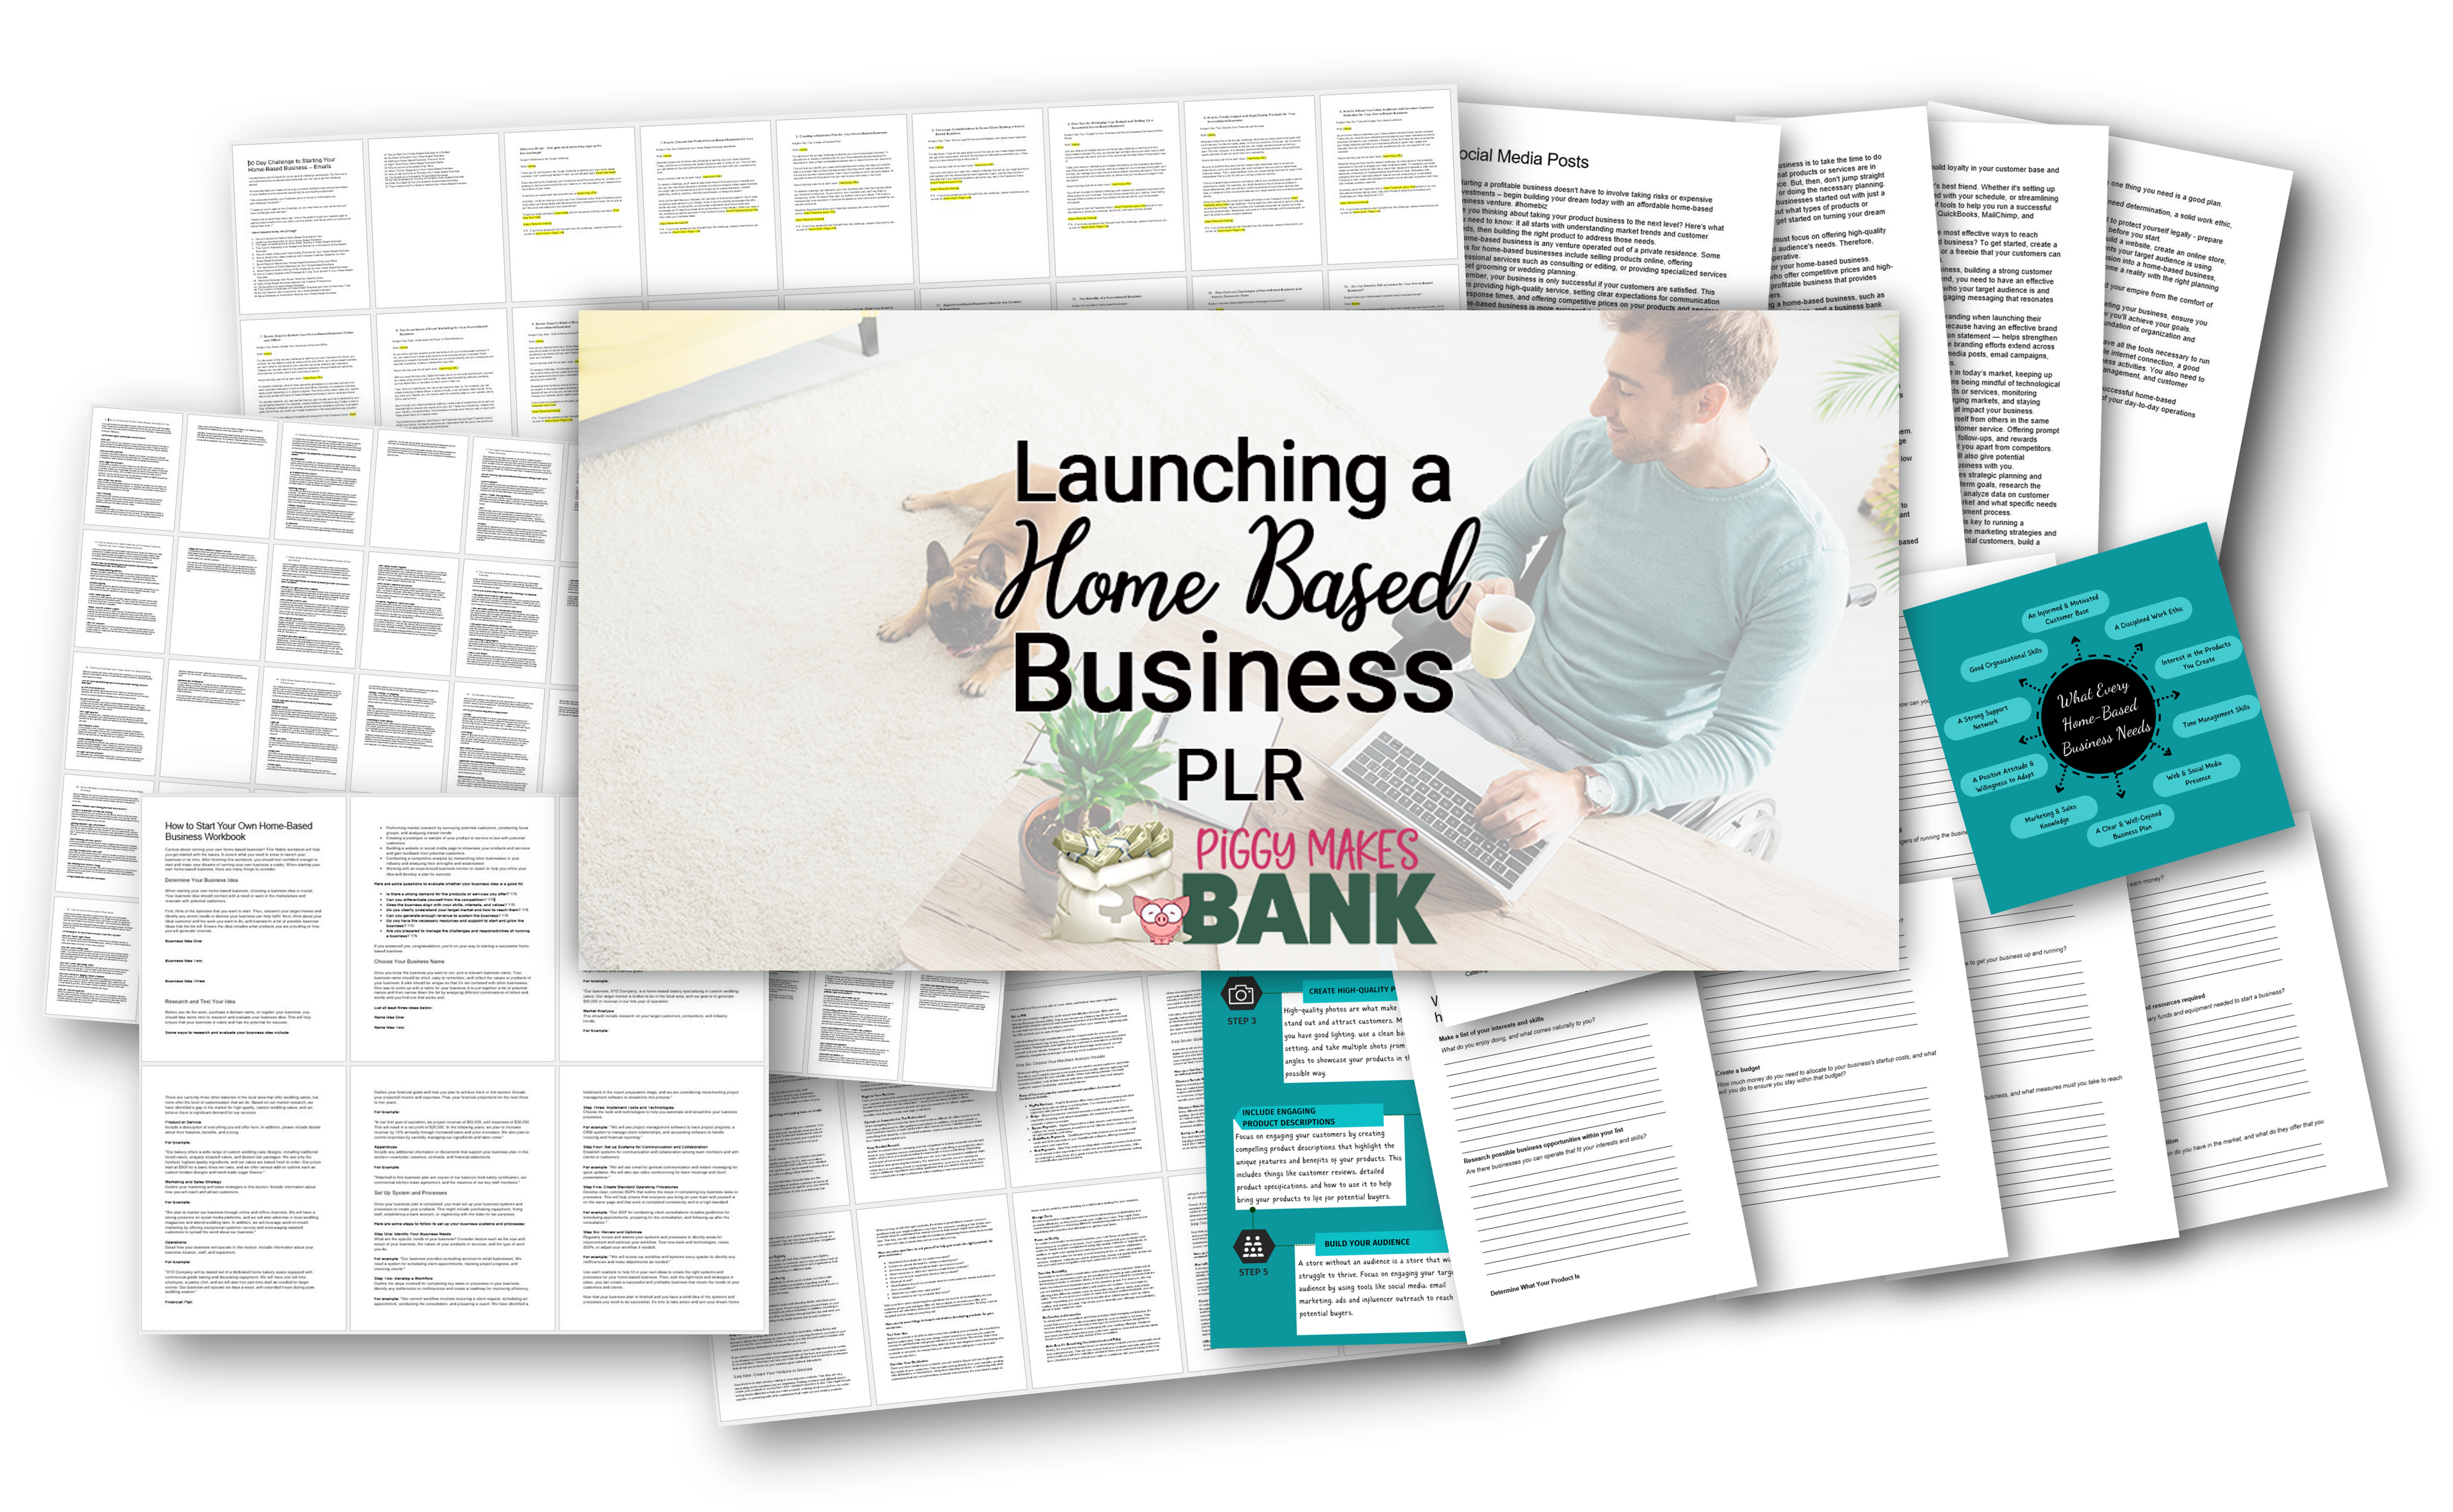 Launching a Home Based Business PLR